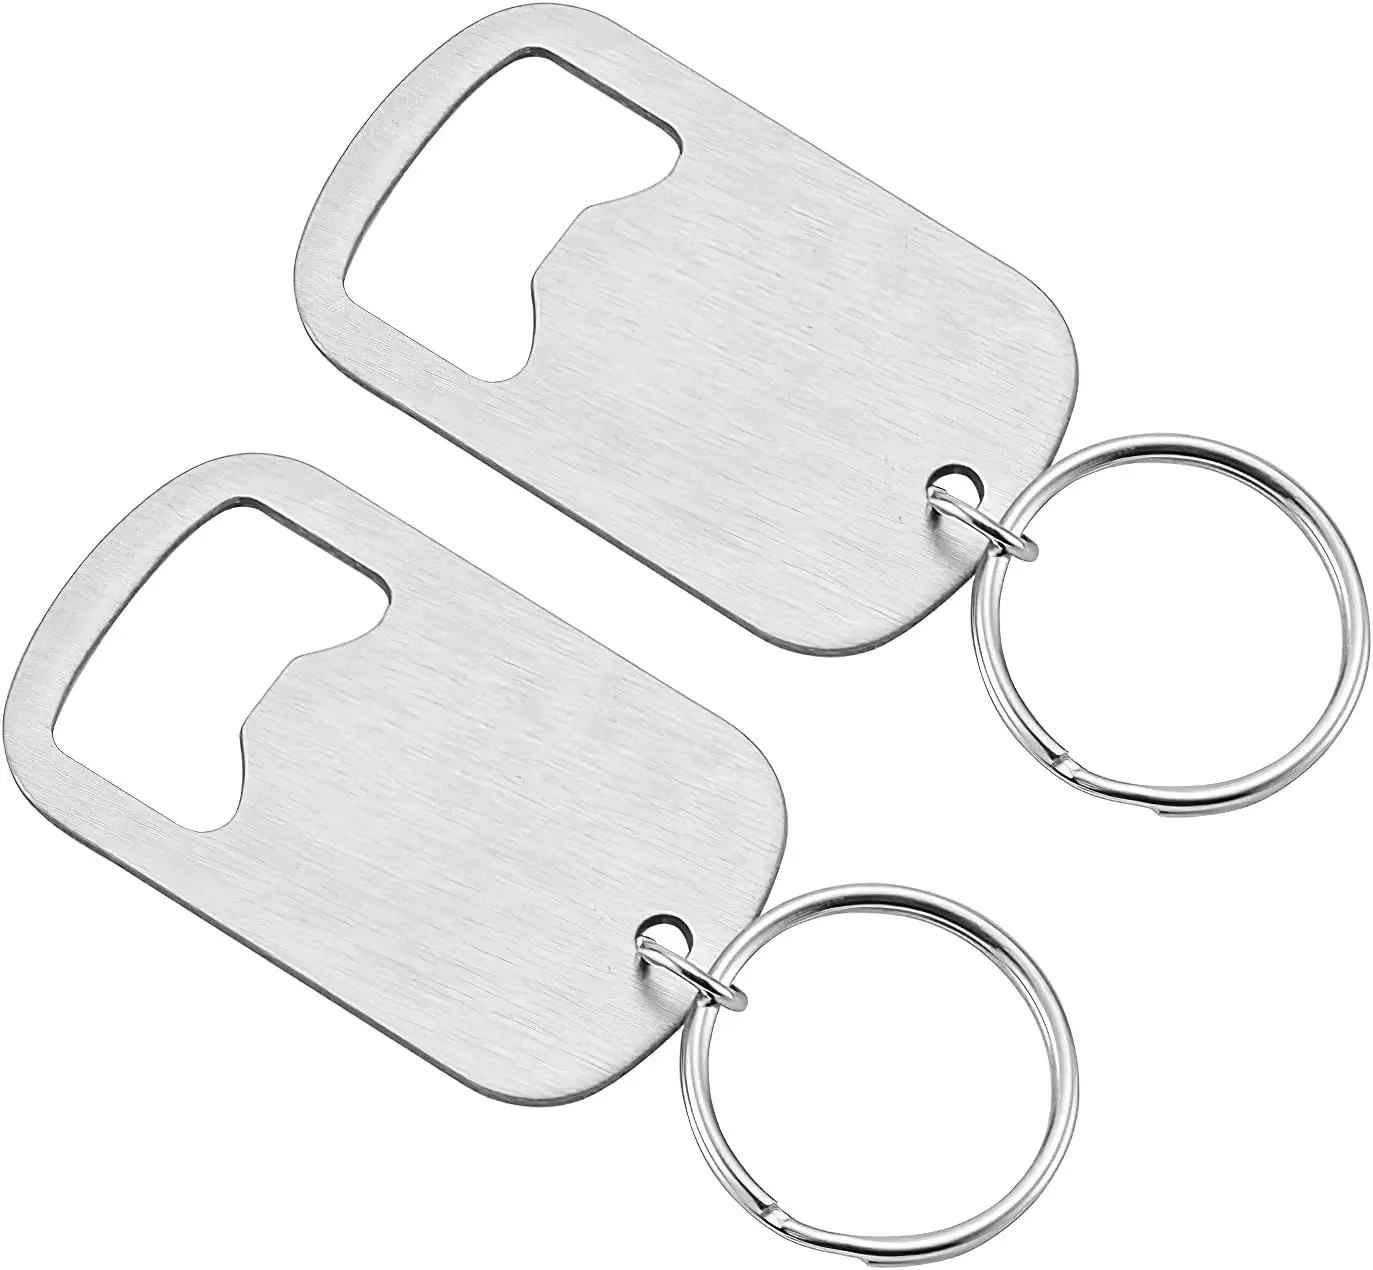 Sturdy and Durable Easy to Carry Stainless Steel Flat Beer Bottle Opener Keychain